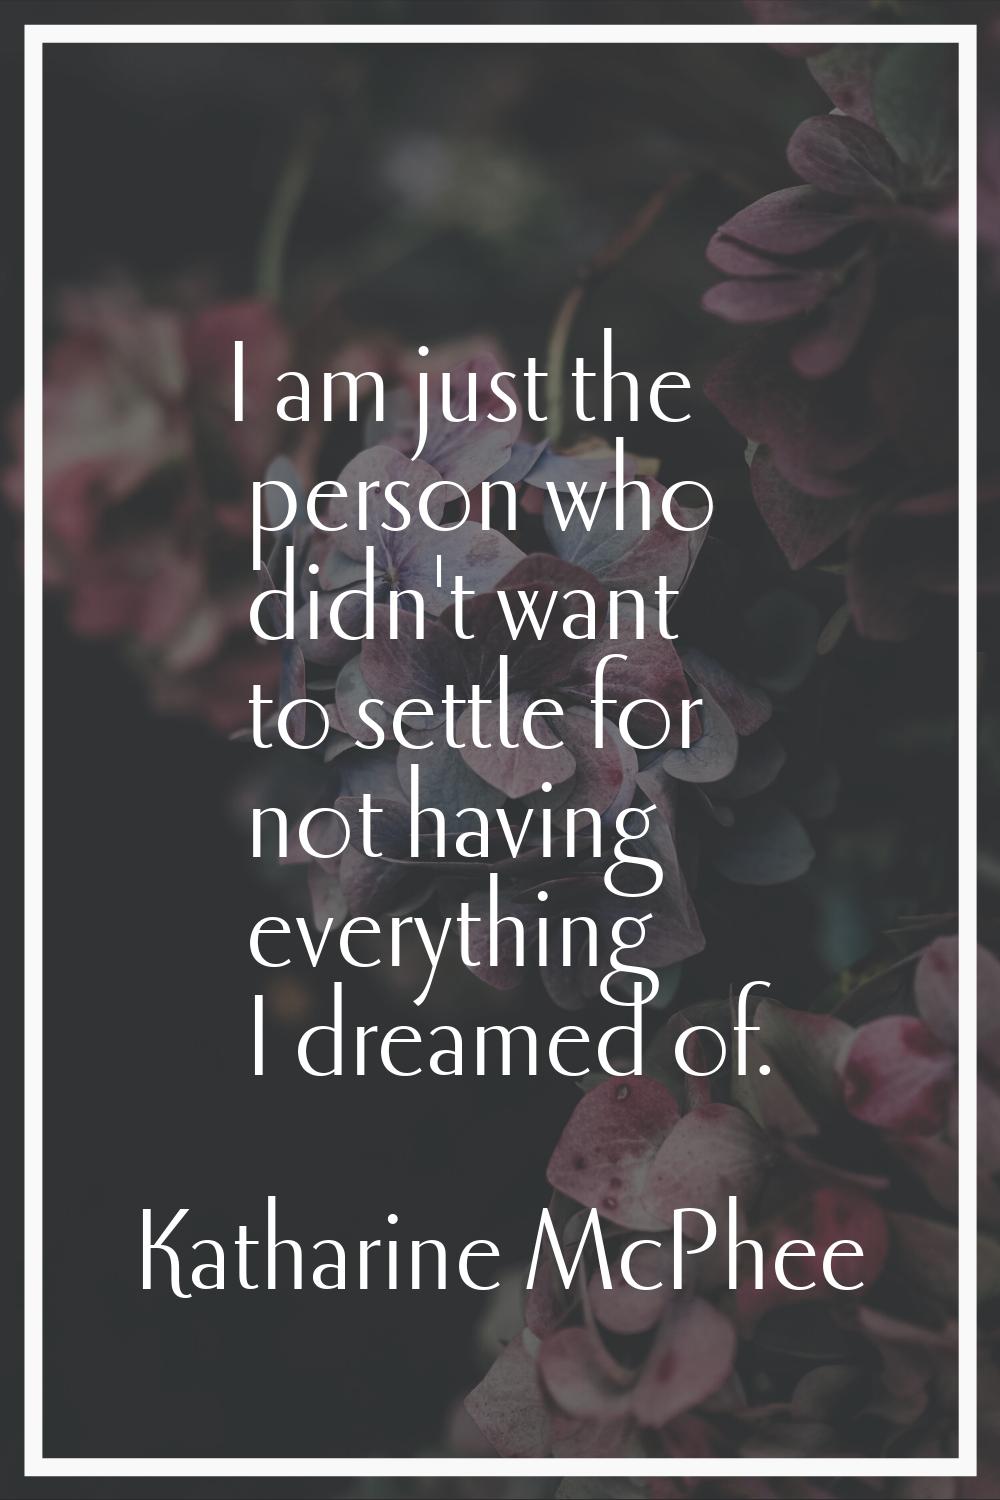 I am just the person who didn't want to settle for not having everything I dreamed of.